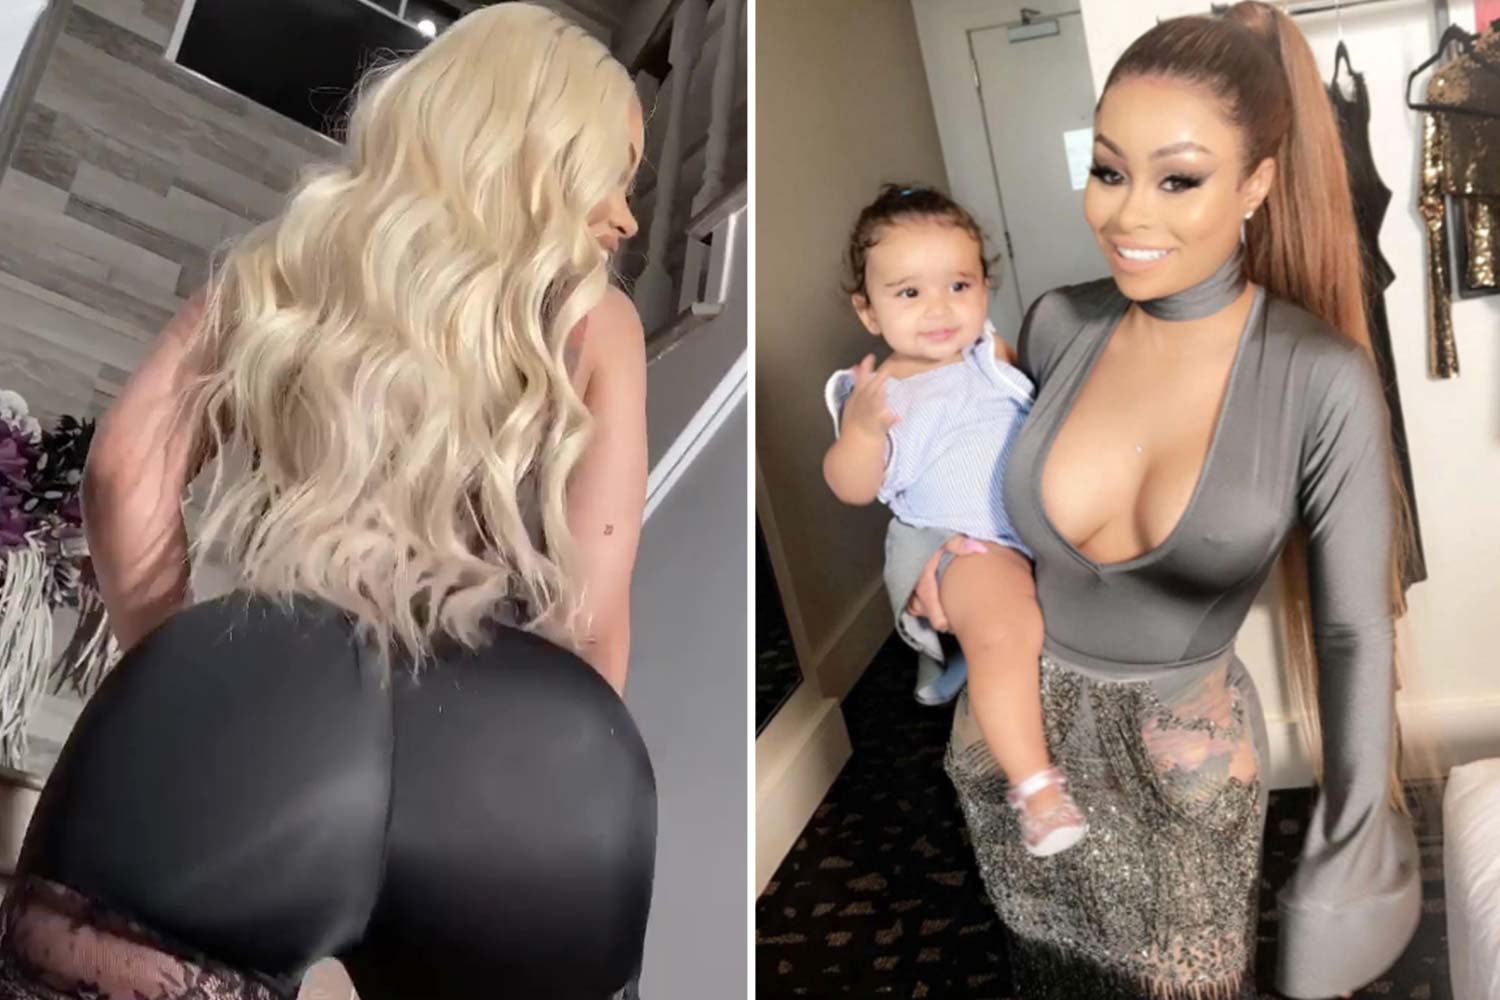 brenda sisson recommends blac chyna twerking naked pic